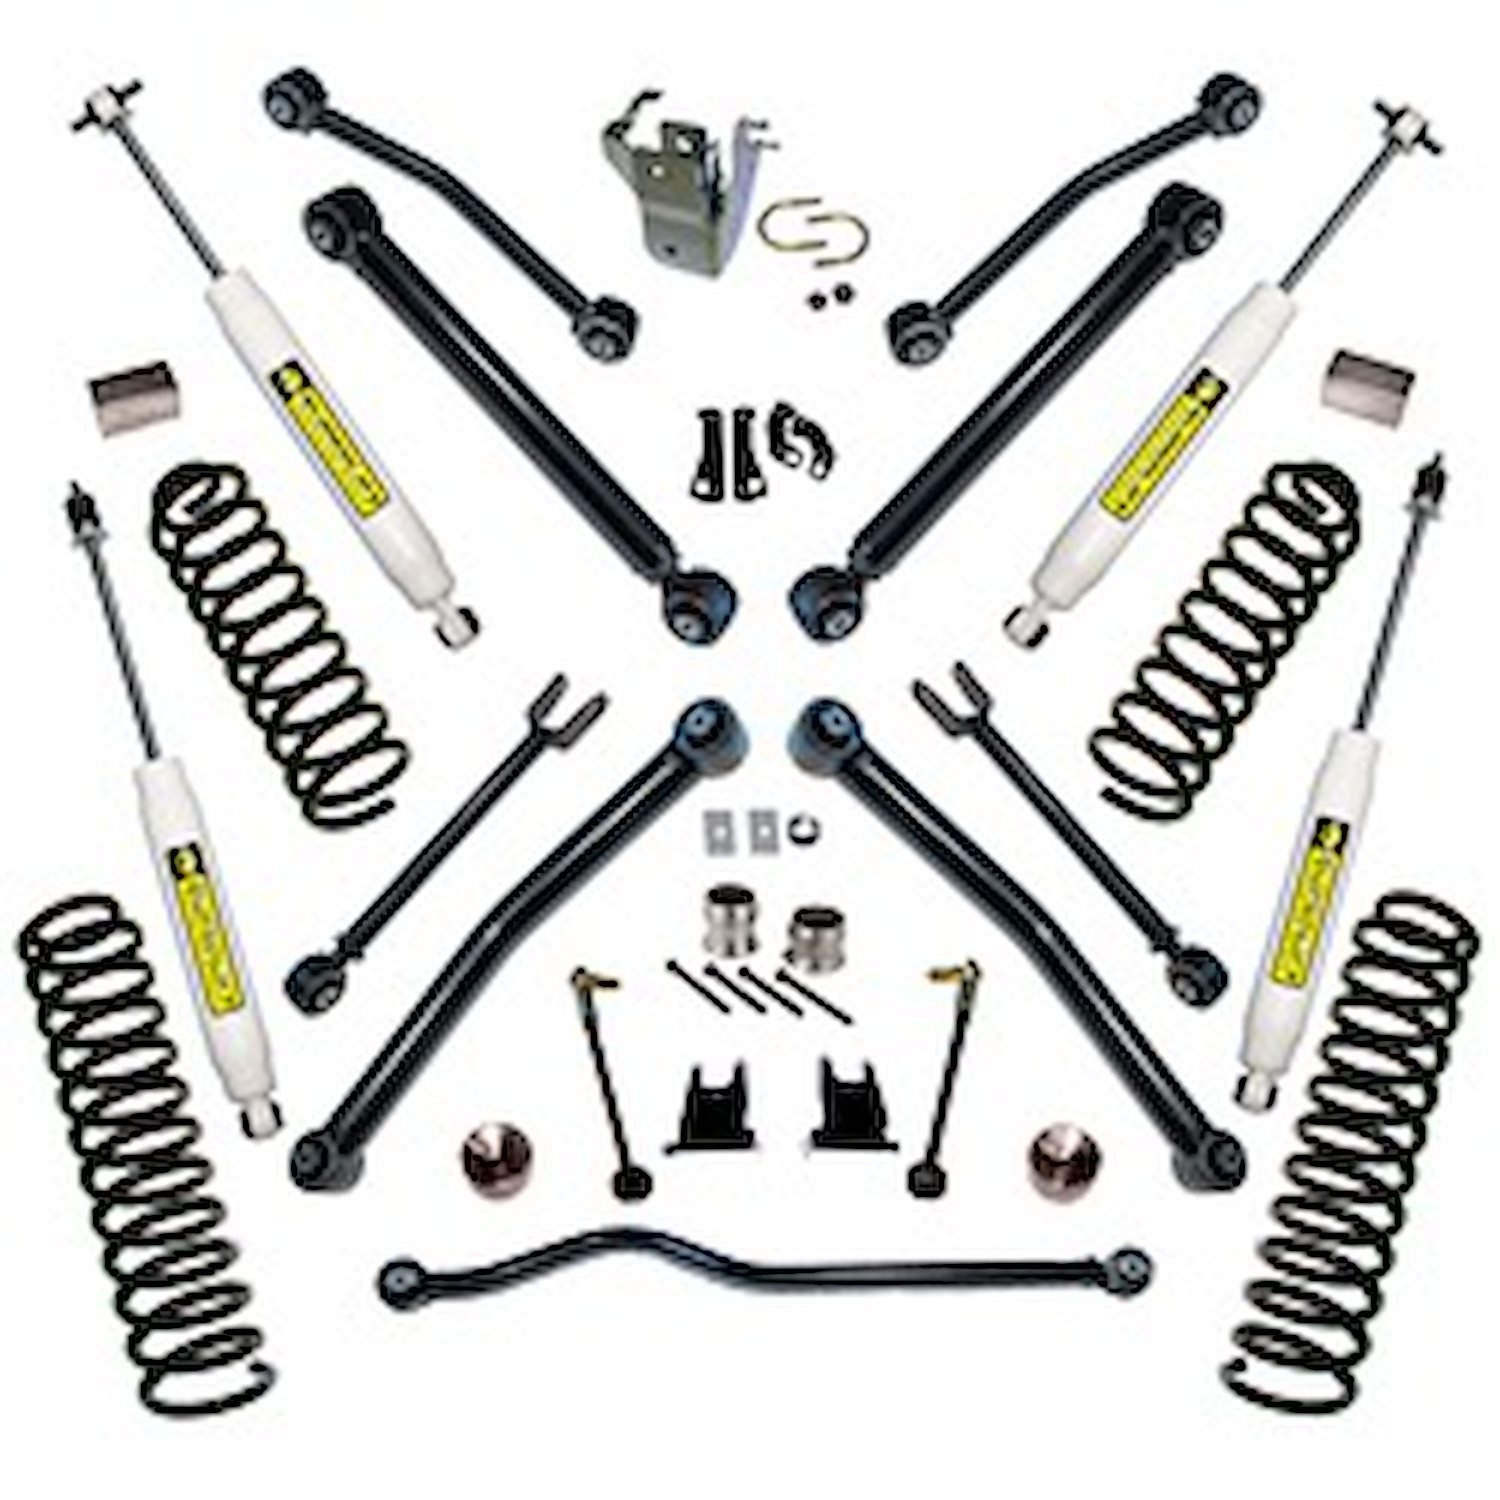 K996 Front and Rear Suspension Lift Kit, Lift Amount: 4 in. Front/4 in. Rear